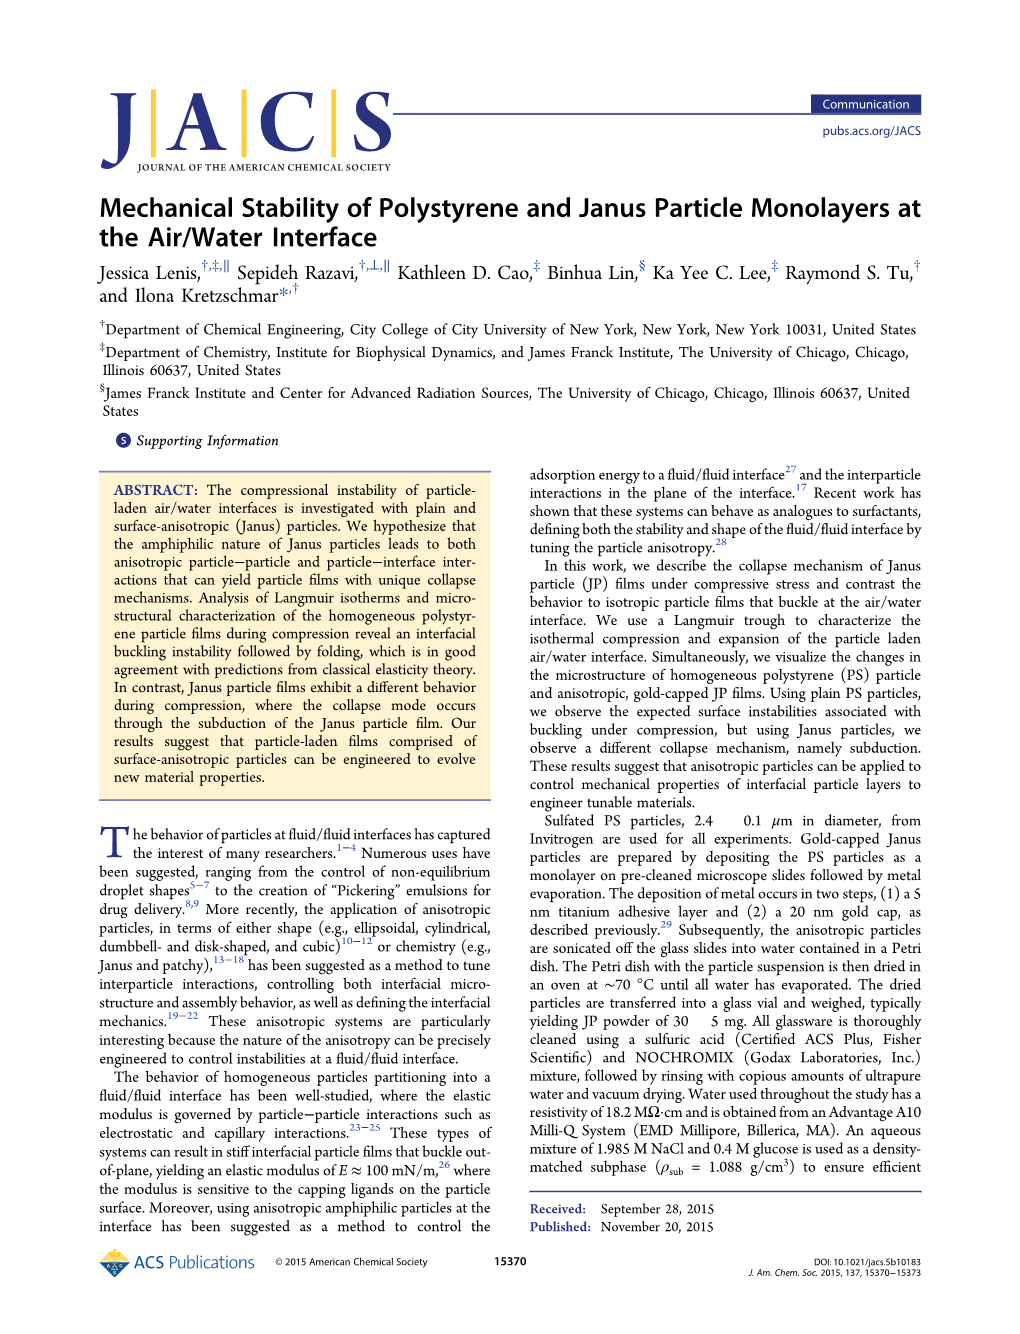 Mechanical Stability of Polystyrene and Janus Particle Monolayers at the Air/Water Interface Jessica Lenis,†,‡,∥ Sepideh Razavi,†,⊥,∥ Kathleen D